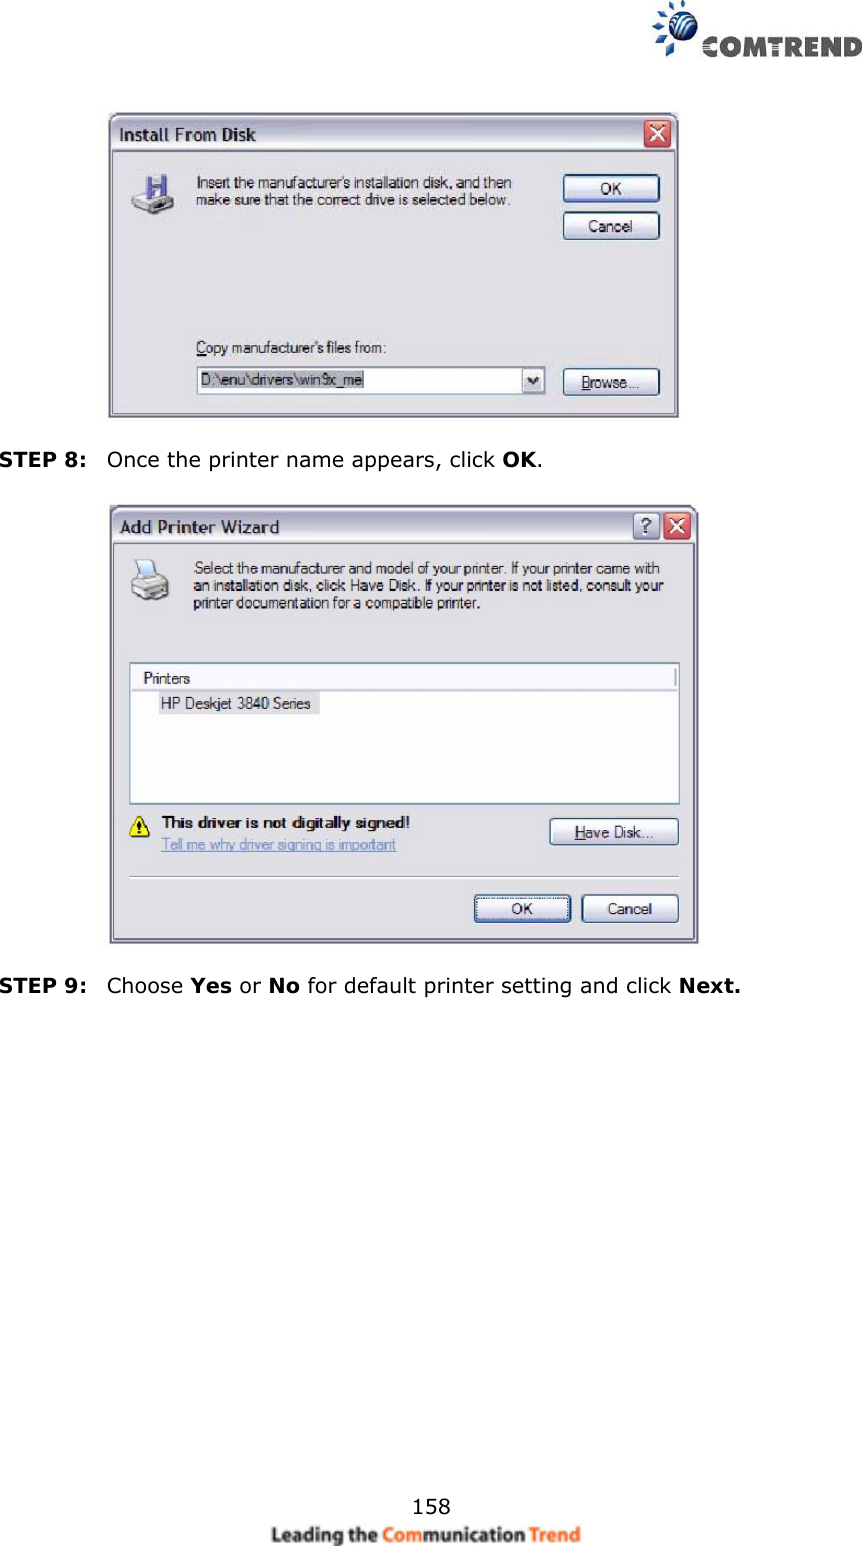    158       STEP 8:  Once the printer name appears, click OK.       STEP 9:  Choose Yes or No for default printer setting and click Next.                    